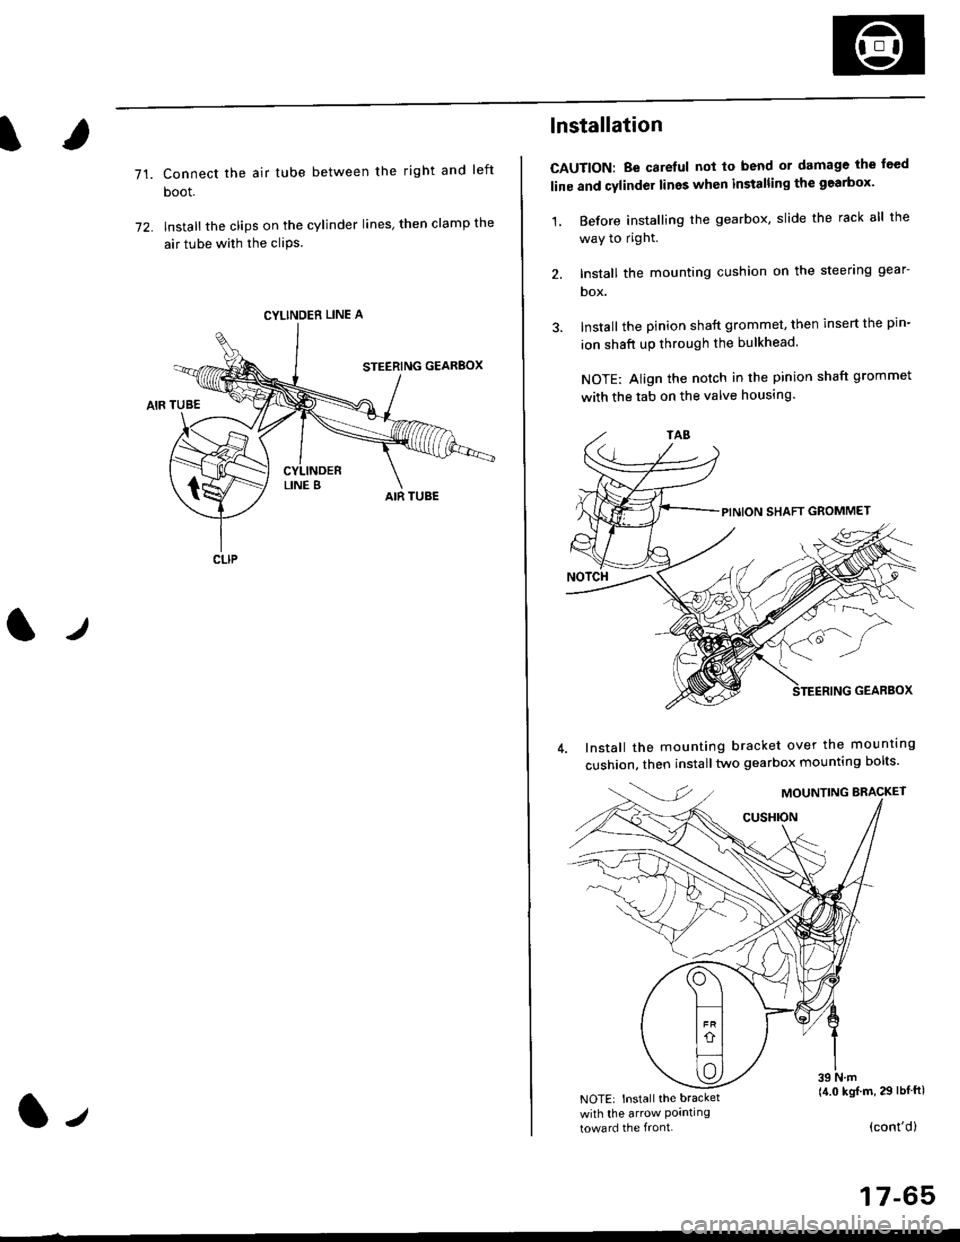 HONDA CIVIC 1996 6.G Repair Manual 71.Connect the air tube between the right and left
boot.
lnstall the clips on the cylinder lines then clamp the
air tube with the cliPs.
l./
CYLINDER LINE A
CLIP
l-,
lnstallation
CAUTION: Be carelul 